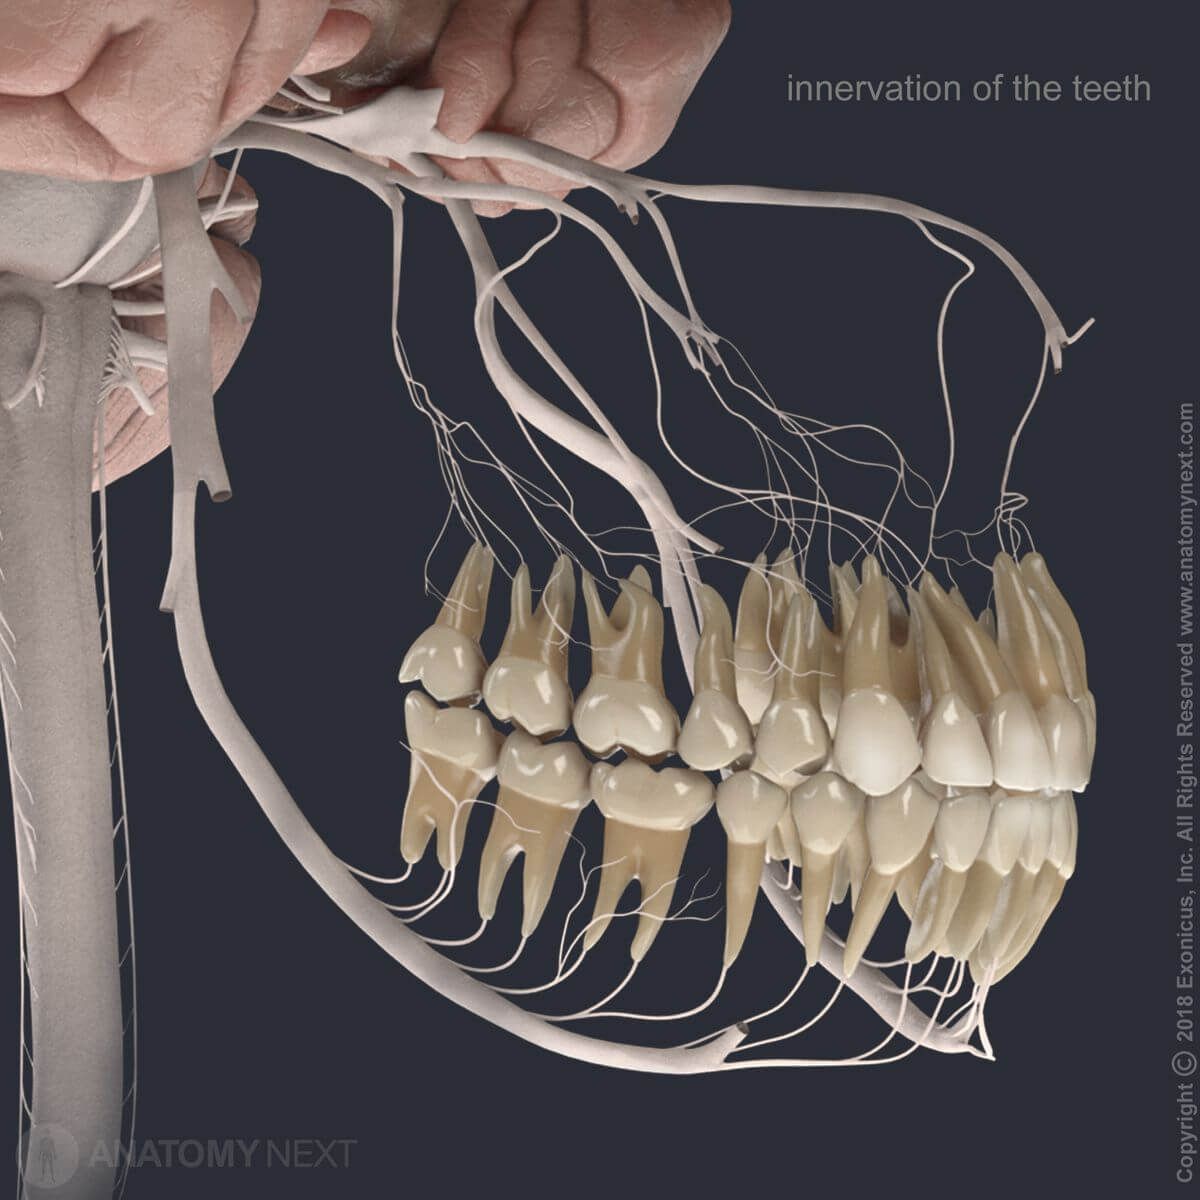 Maxillary nerve, second division of fifth cranial nerve, CN V2, second branch of trigeminal nerve, branches of maxillary nerve, innervation of teeth